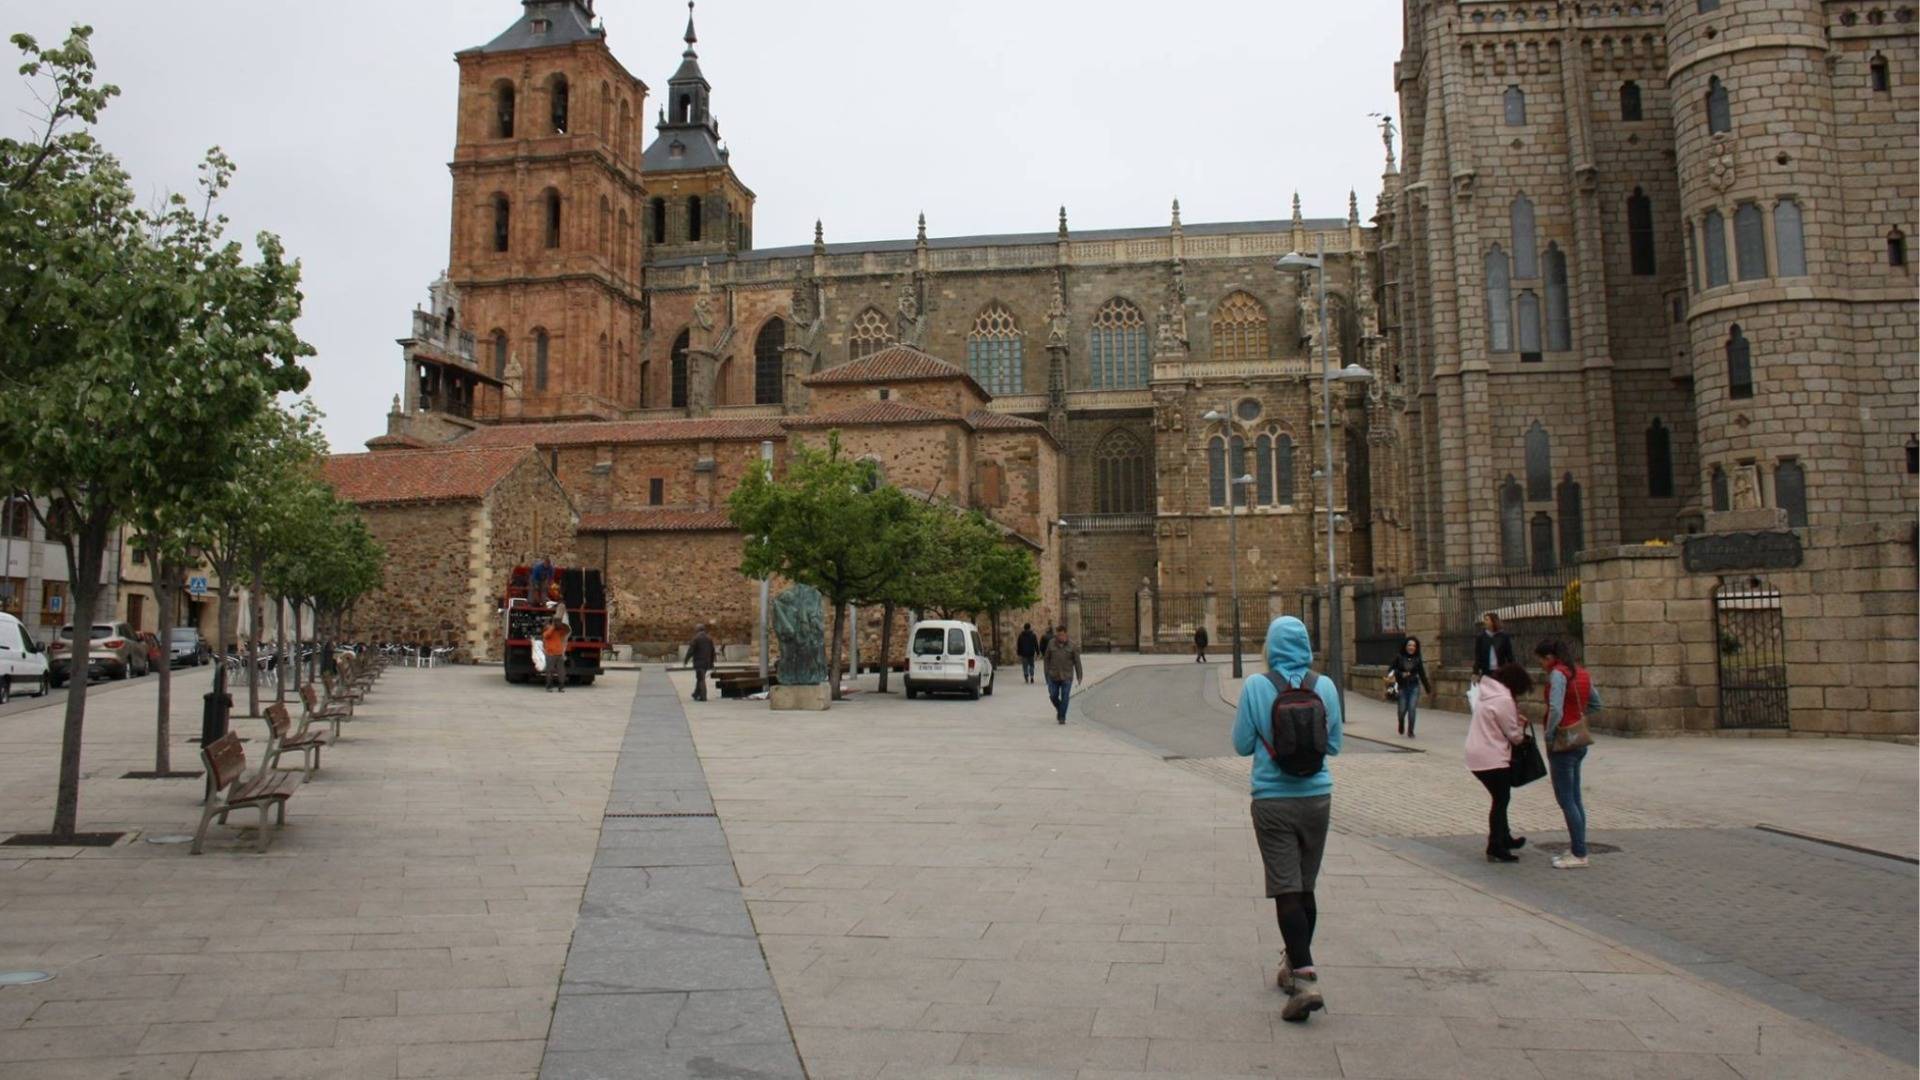 Astorga is renowned for its delicious chocolates and the Astorga Cathedral